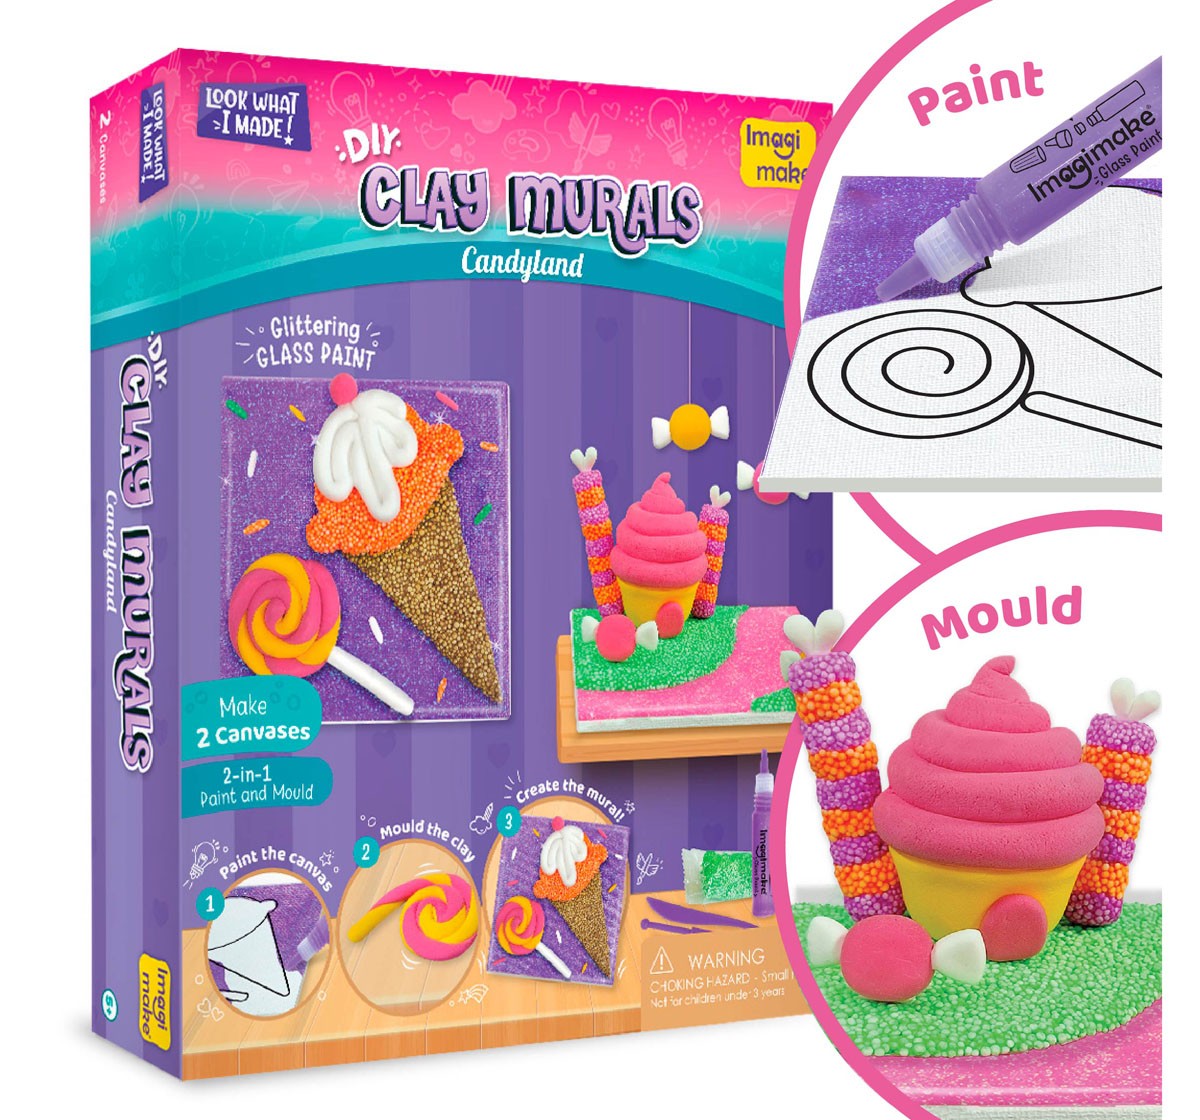 Imagimake Clay Mural Candy Land Glass Painting Craft Set for kids 5Y+, Multicolour